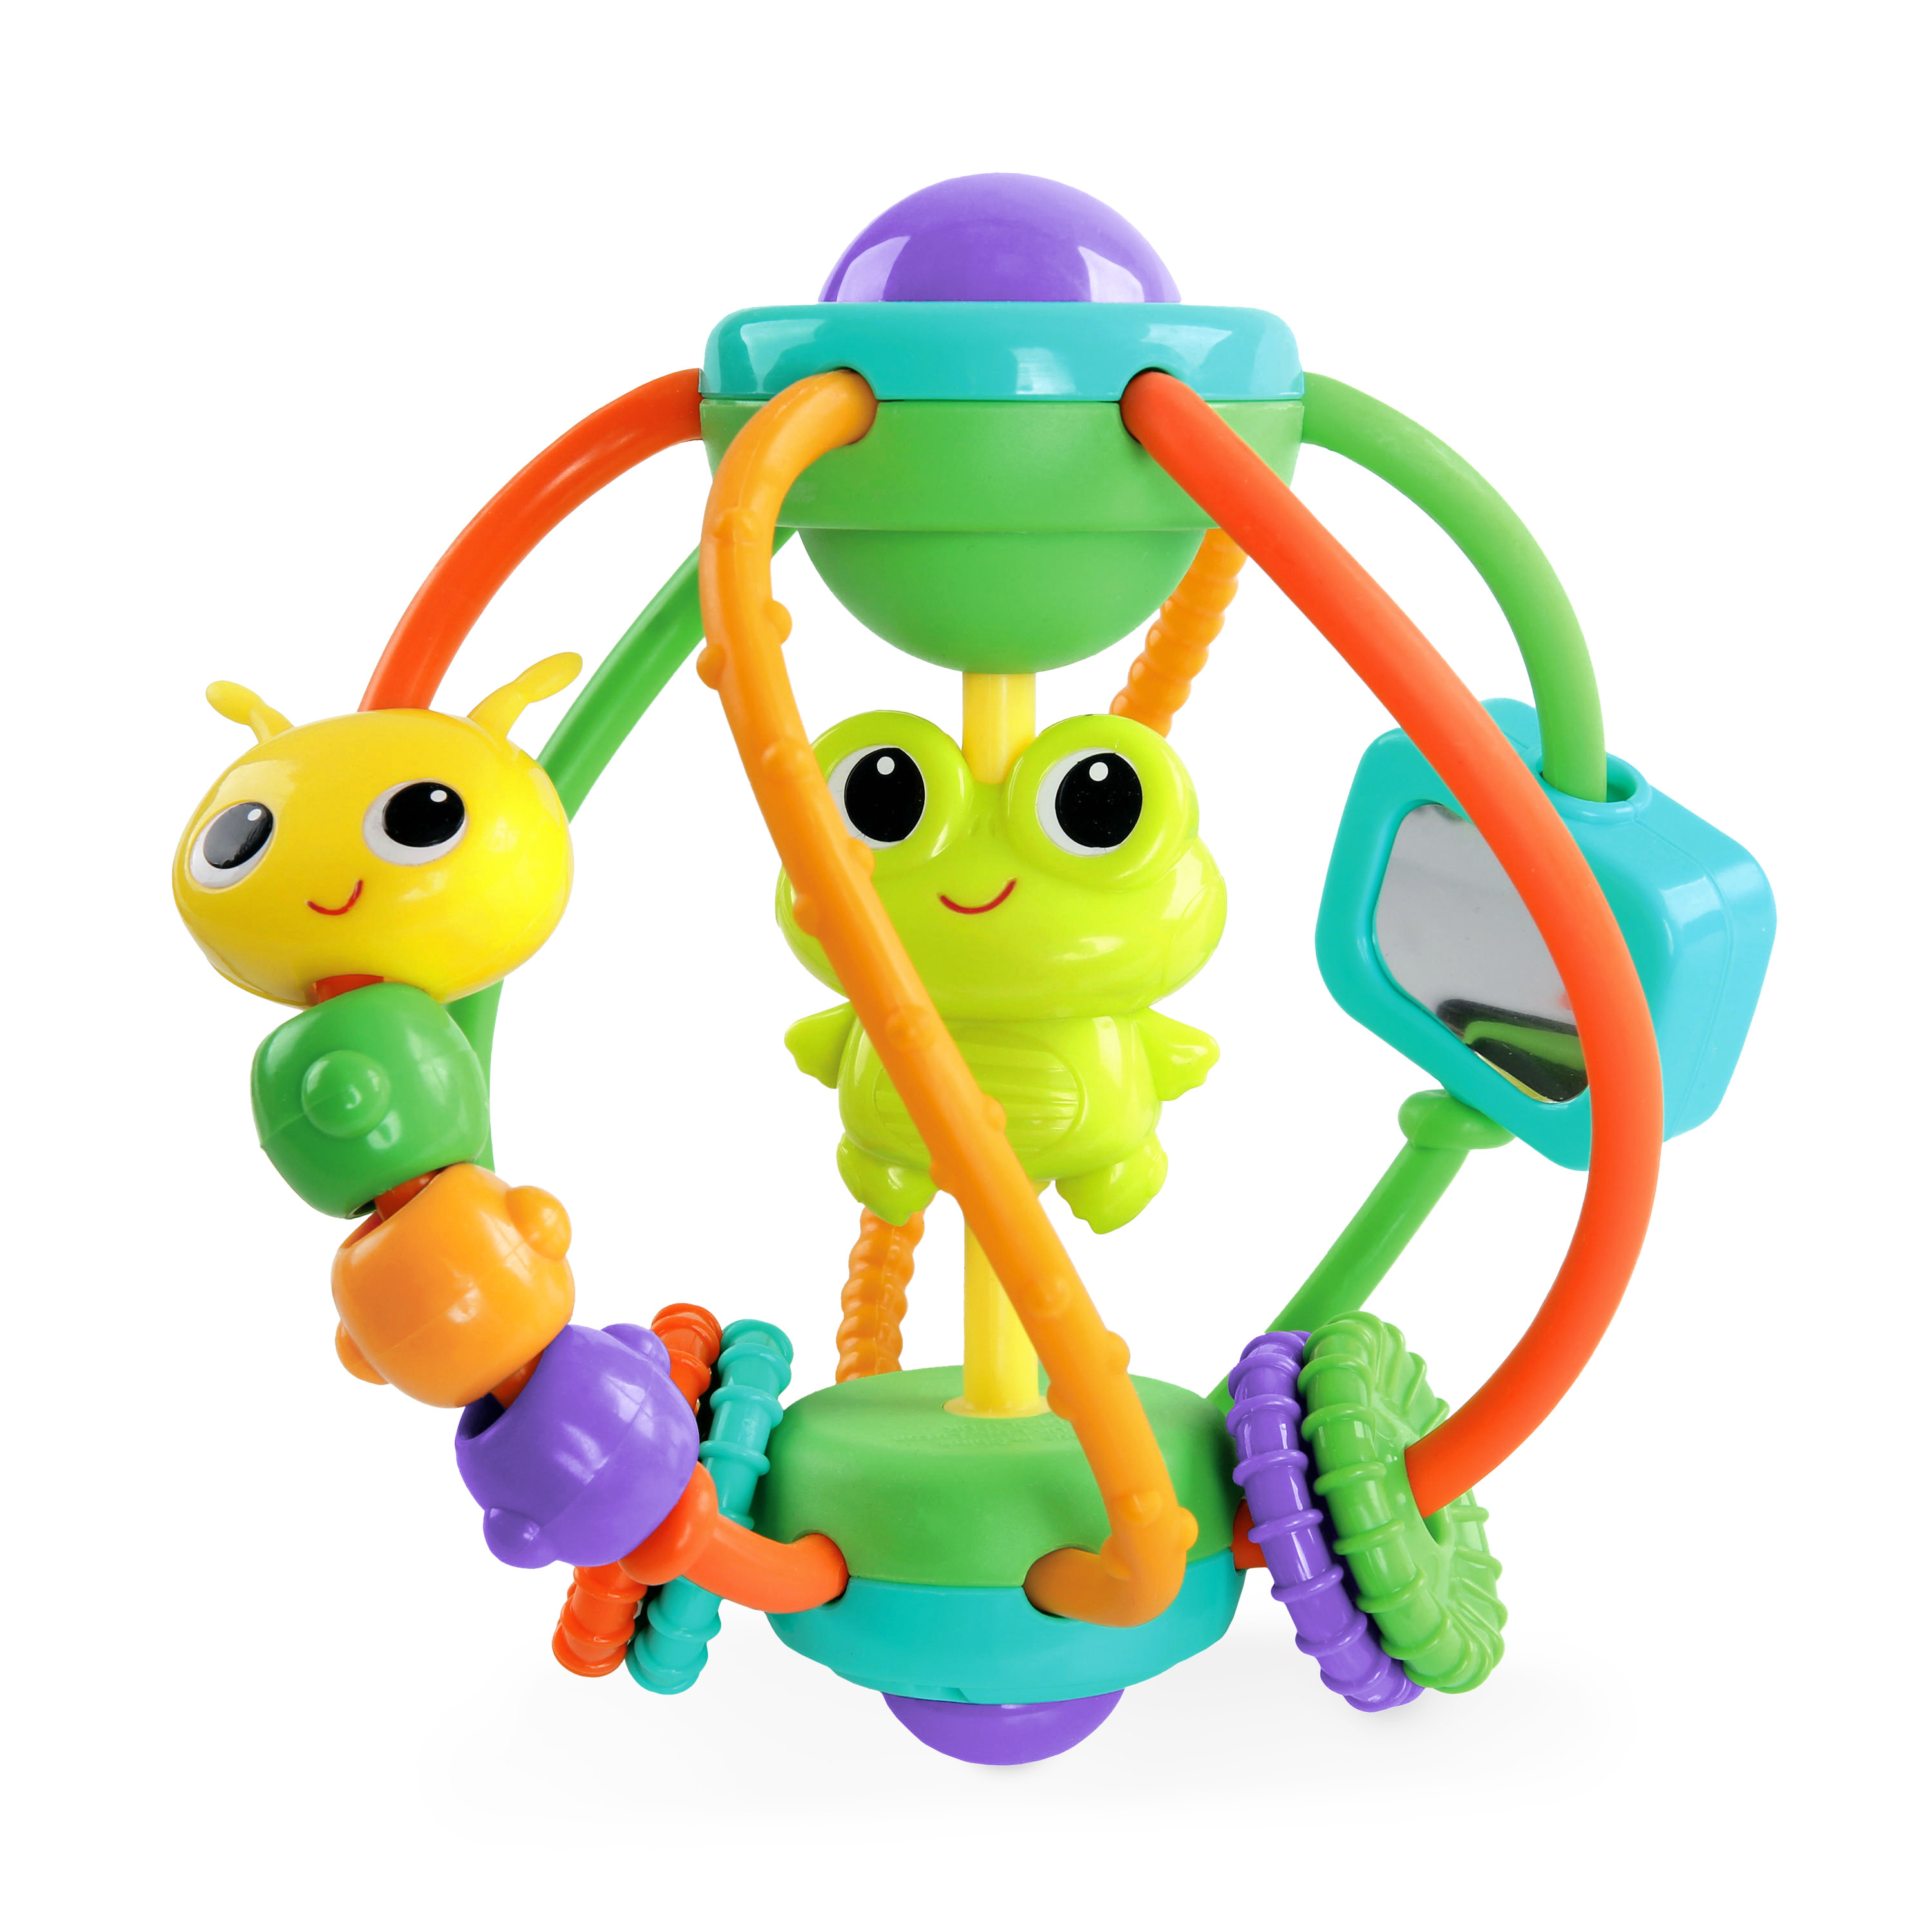 Bright Starts Clack & Slide Activity Ball Toy, Ages 6 months + - image 1 of 3